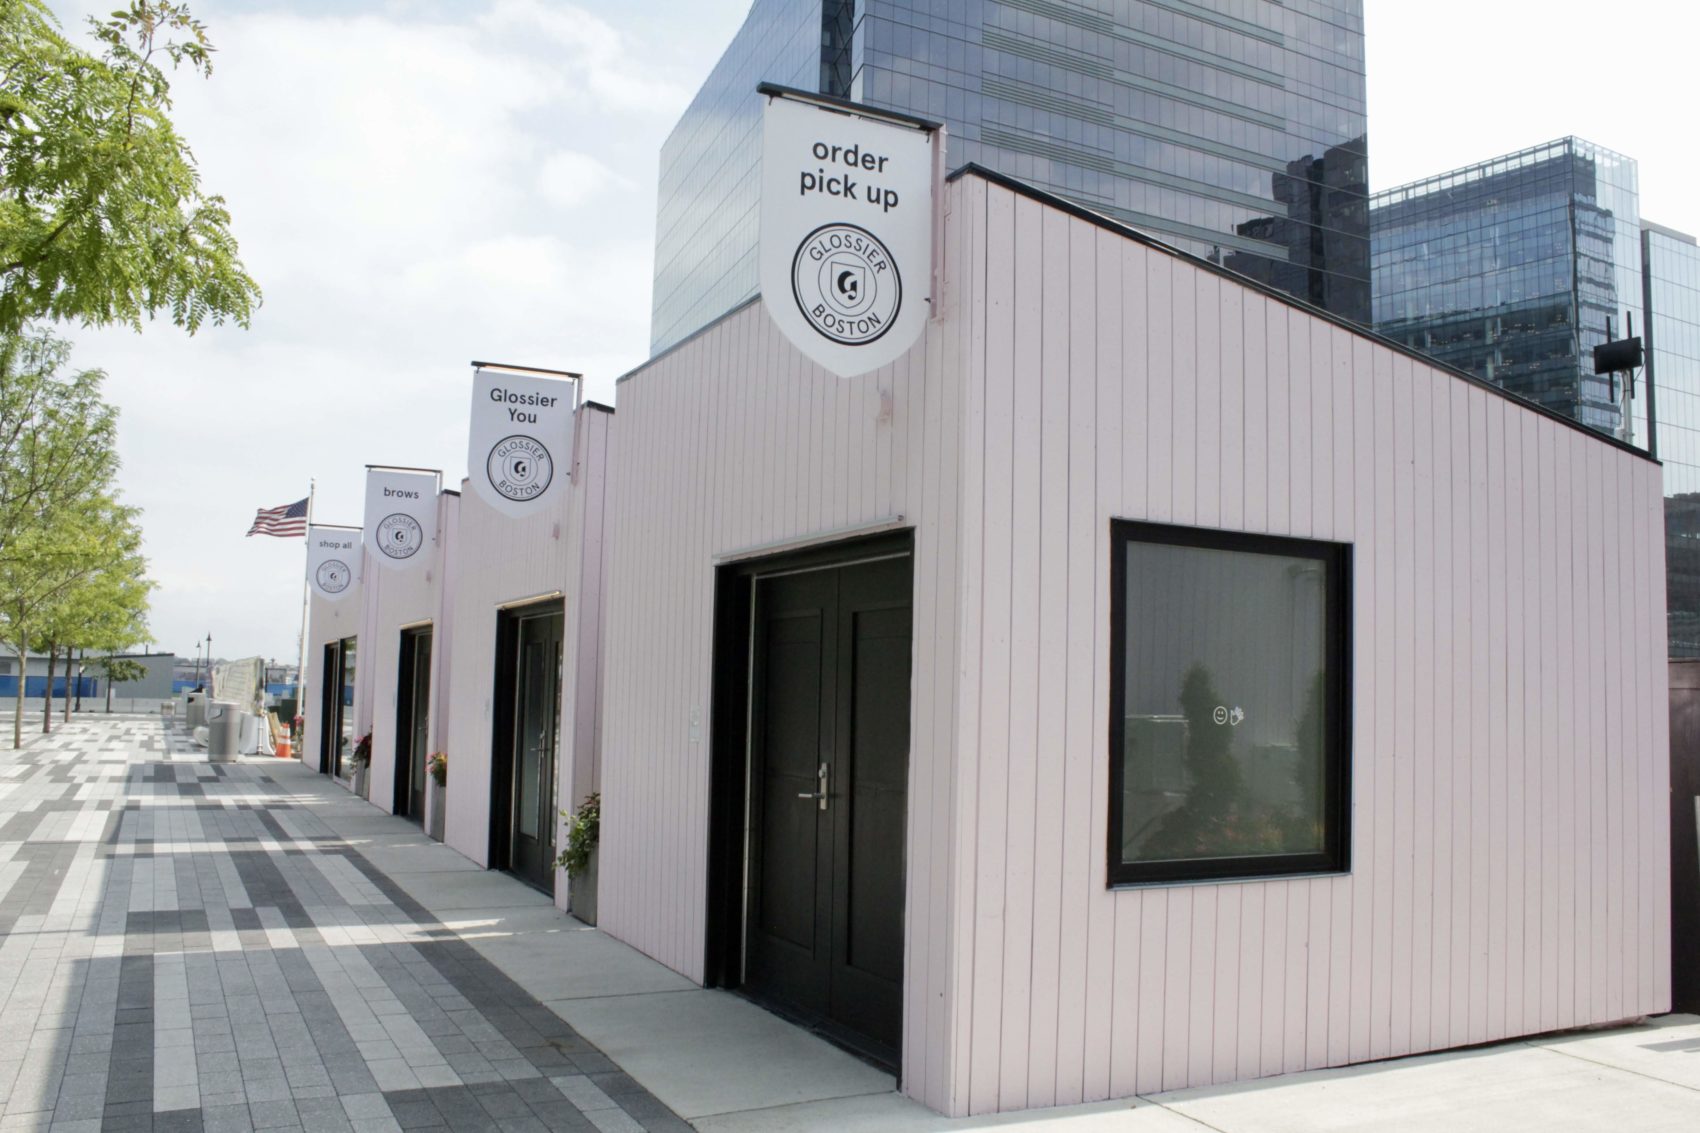 The outside of the Glossier pop-up shop, located at The Current in Boston's Seaport. (Meghan B. Kelly/WBUR)